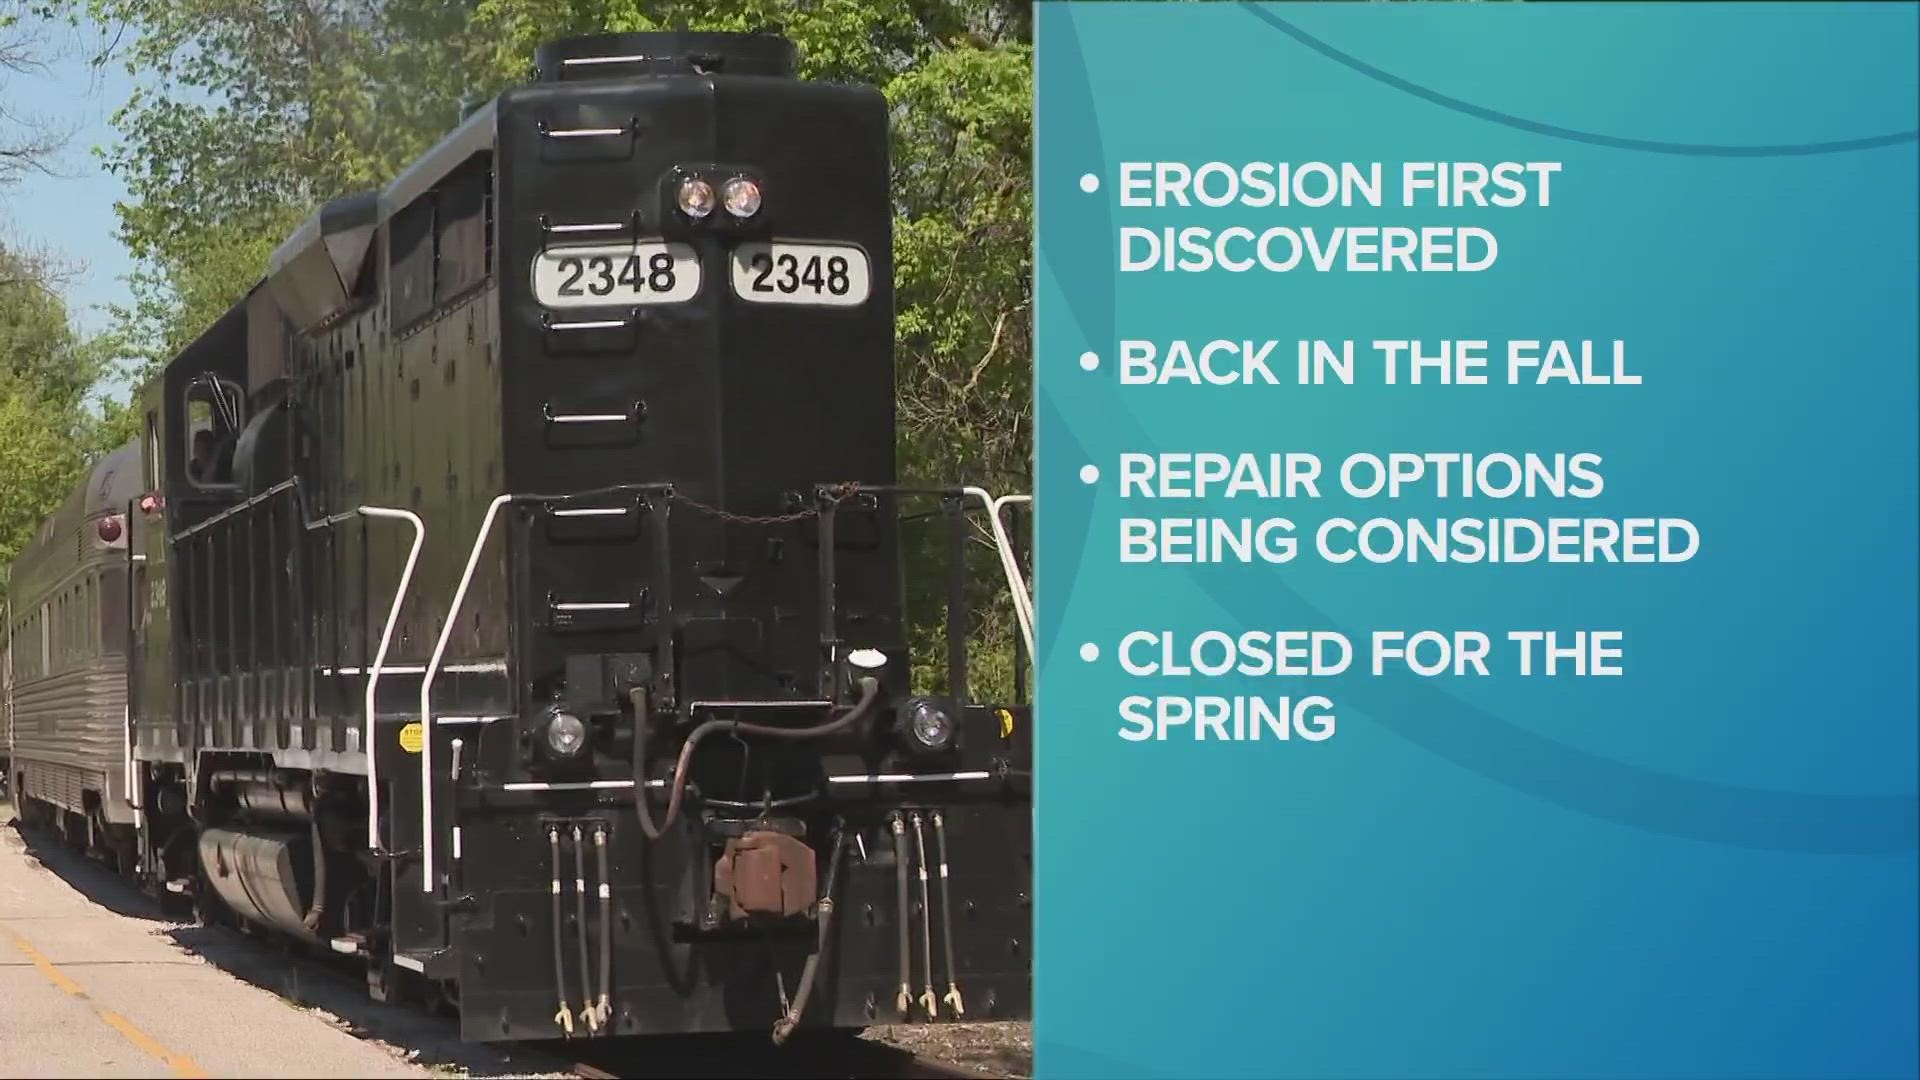 CVSR and the National Park Service are hoping to restart operations this summer.